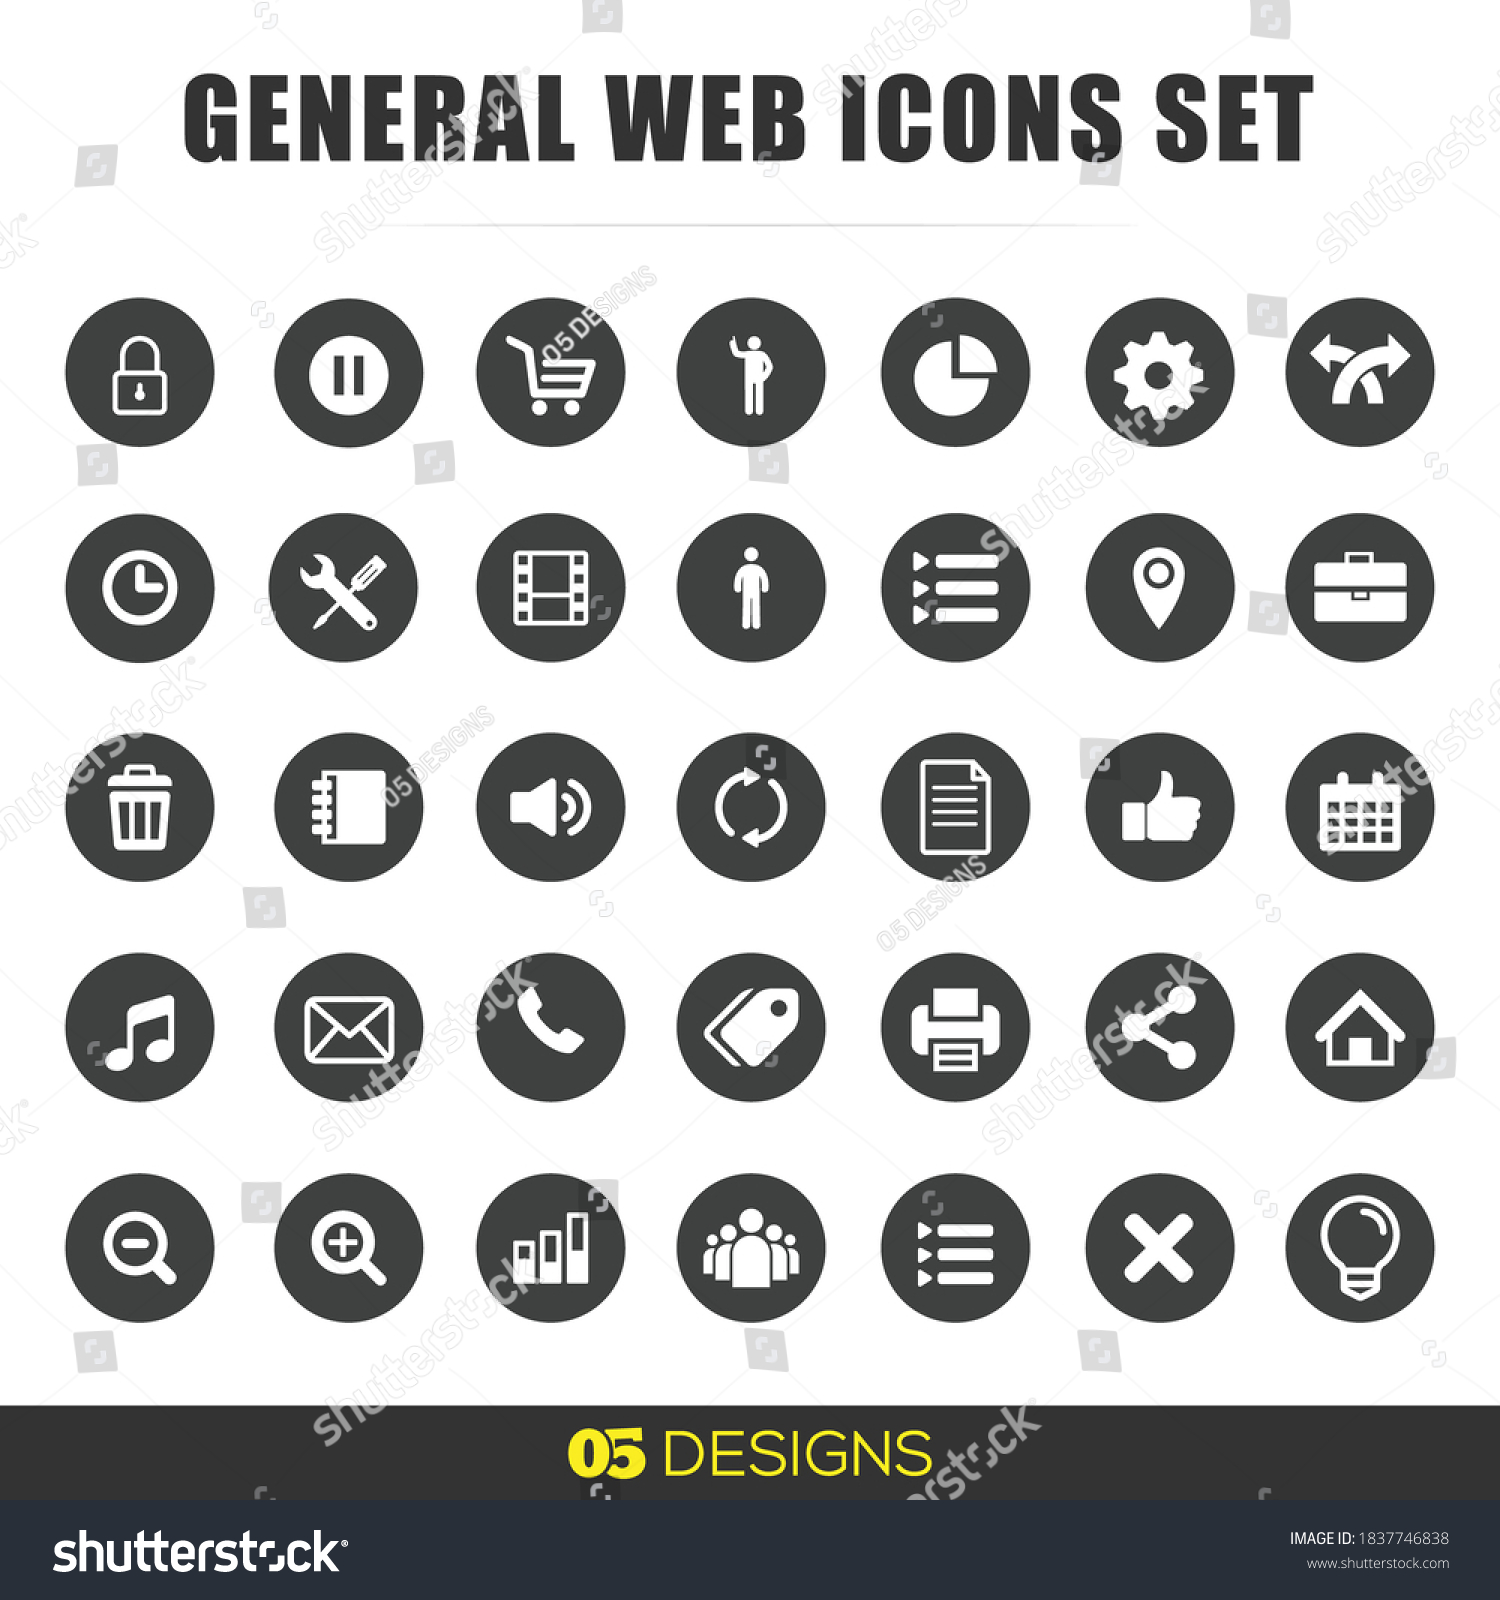 SVG of Web Icons Set- location icon, office, internet icon, share icon, zoom logos, svg, flat minimal small icon, social media for websites, general web icons,side menu bar, app icons, play, pause svg